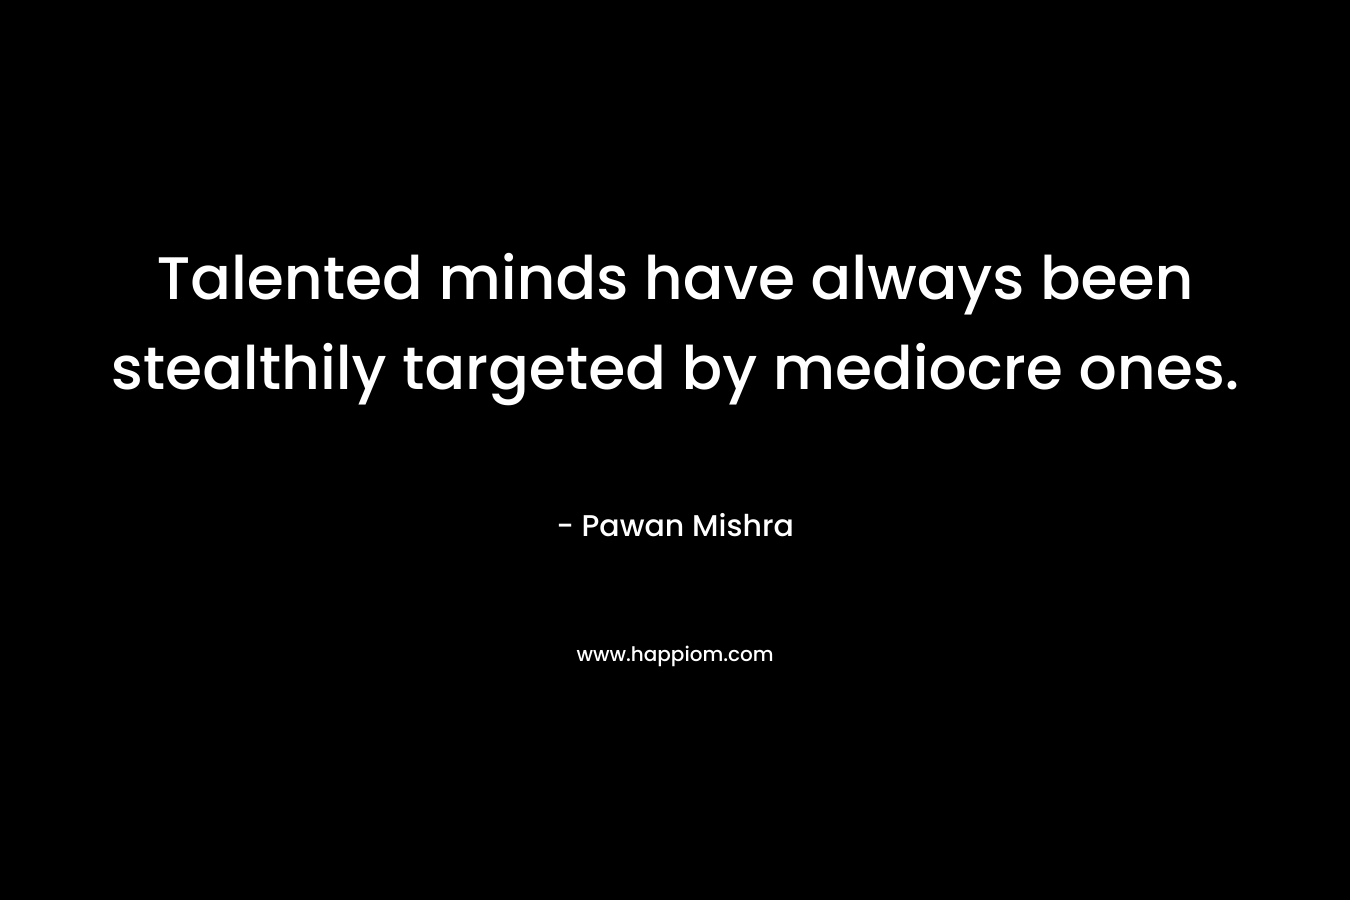 Talented minds have always been stealthily targeted by mediocre ones. – Pawan Mishra